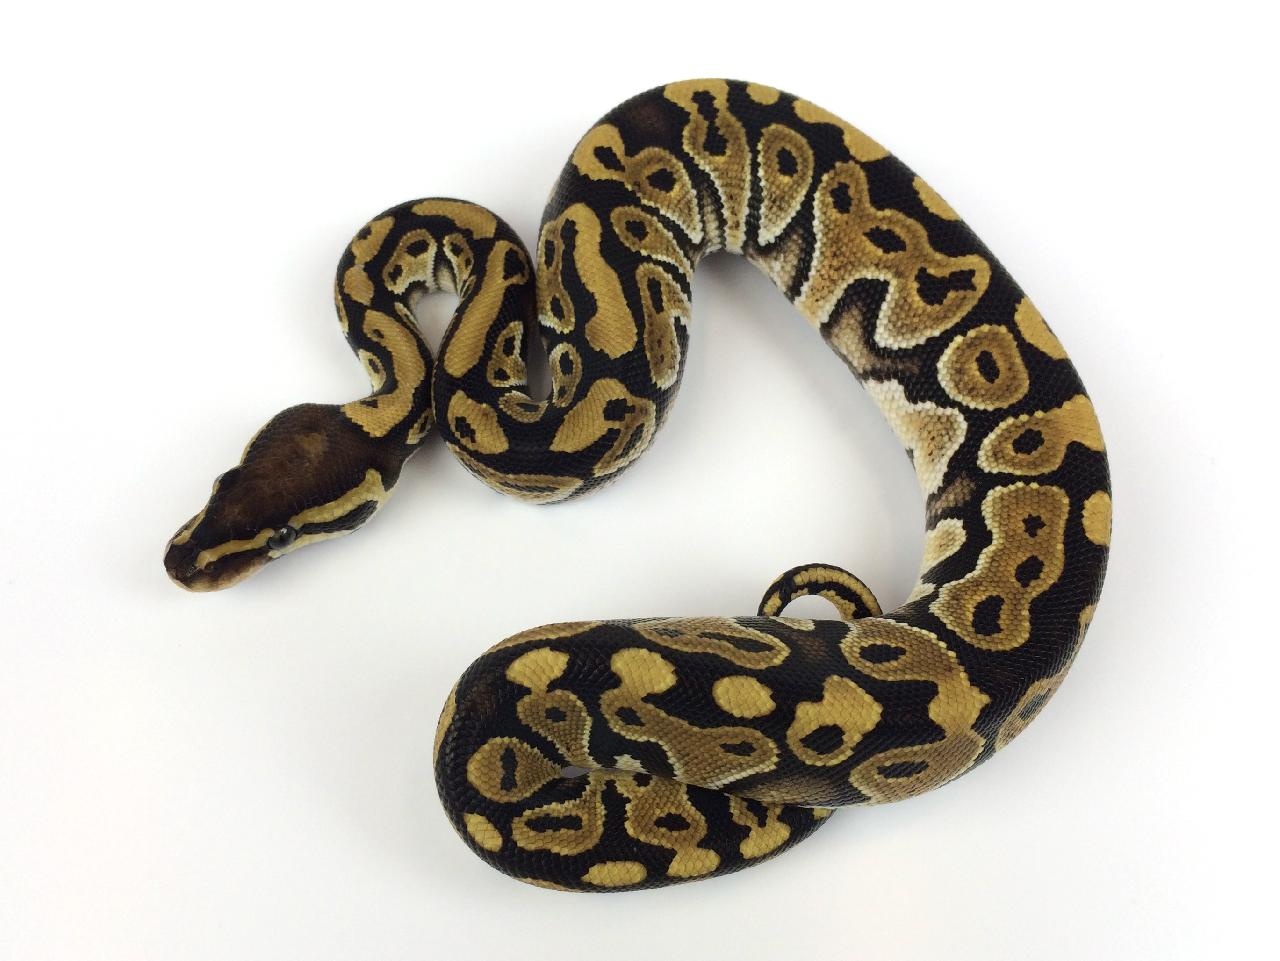 Mystic Ball Python by Royal Constrictor Designs